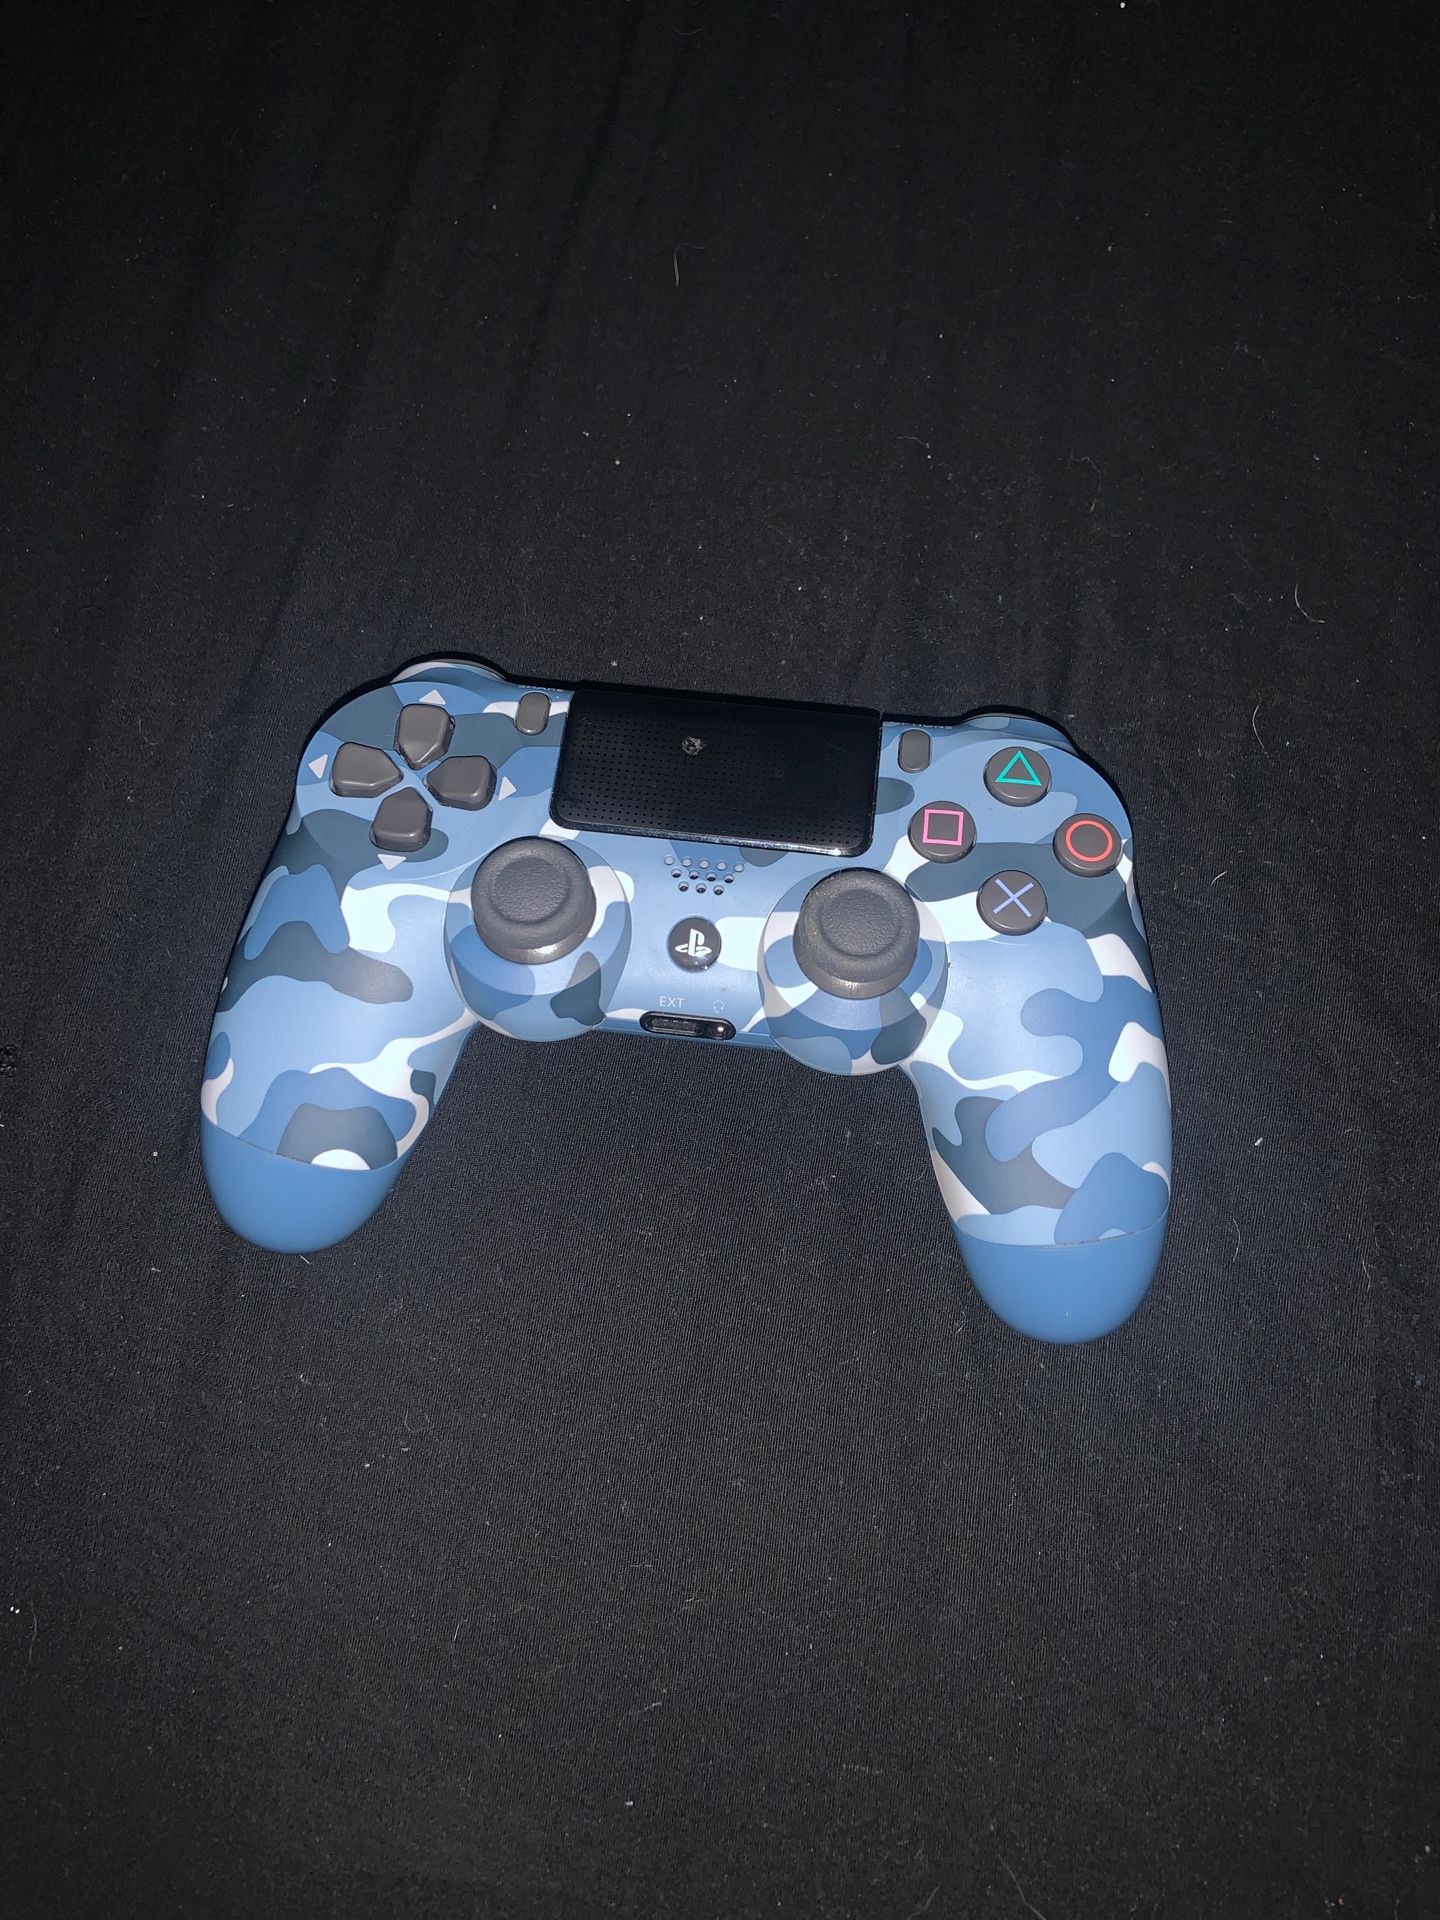 PlayStation 4 controller and game